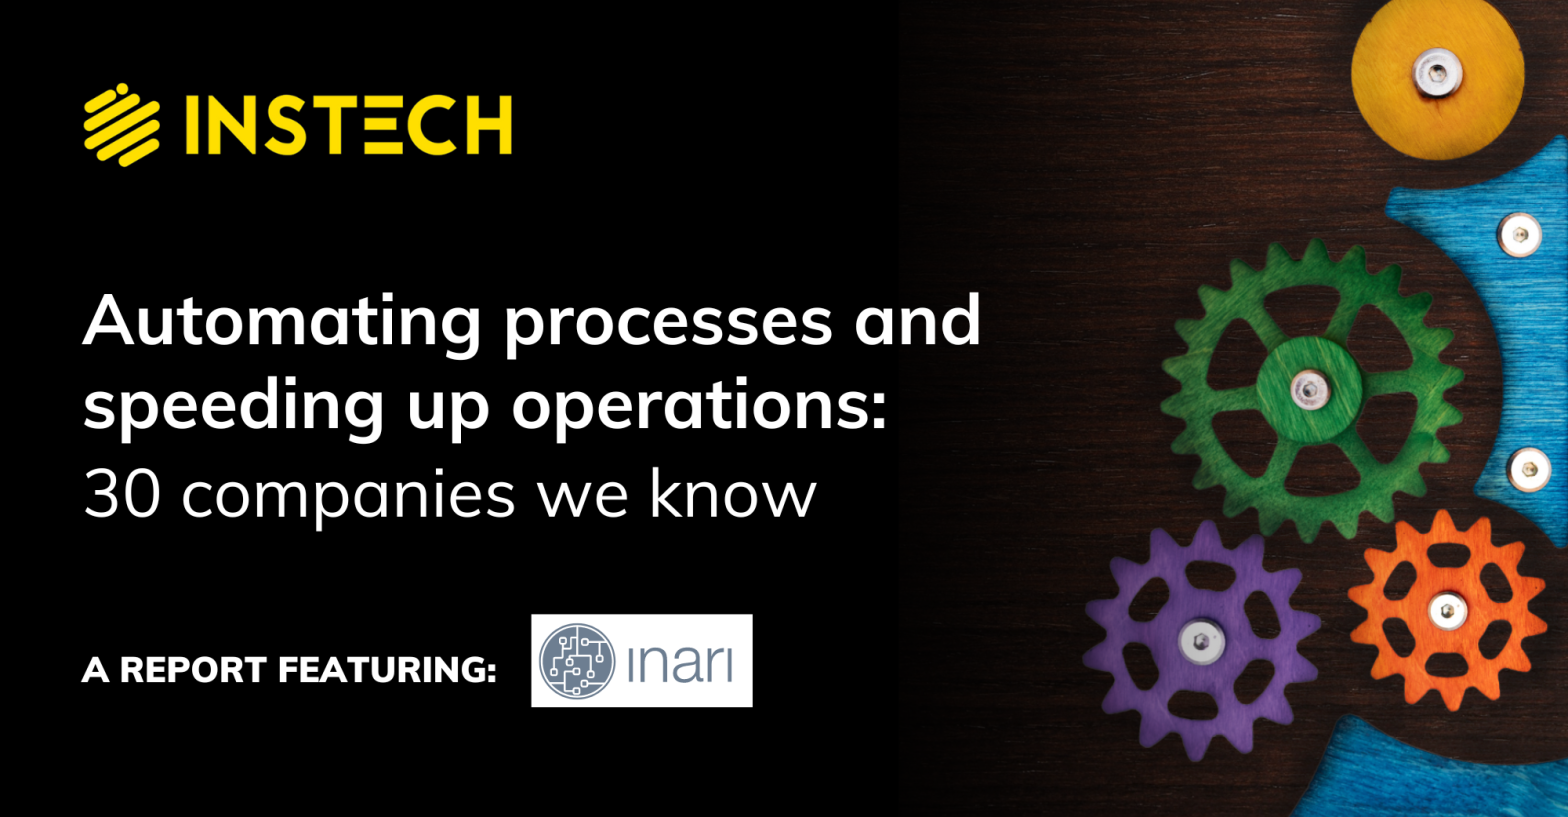 Inari features in Instech's latest report